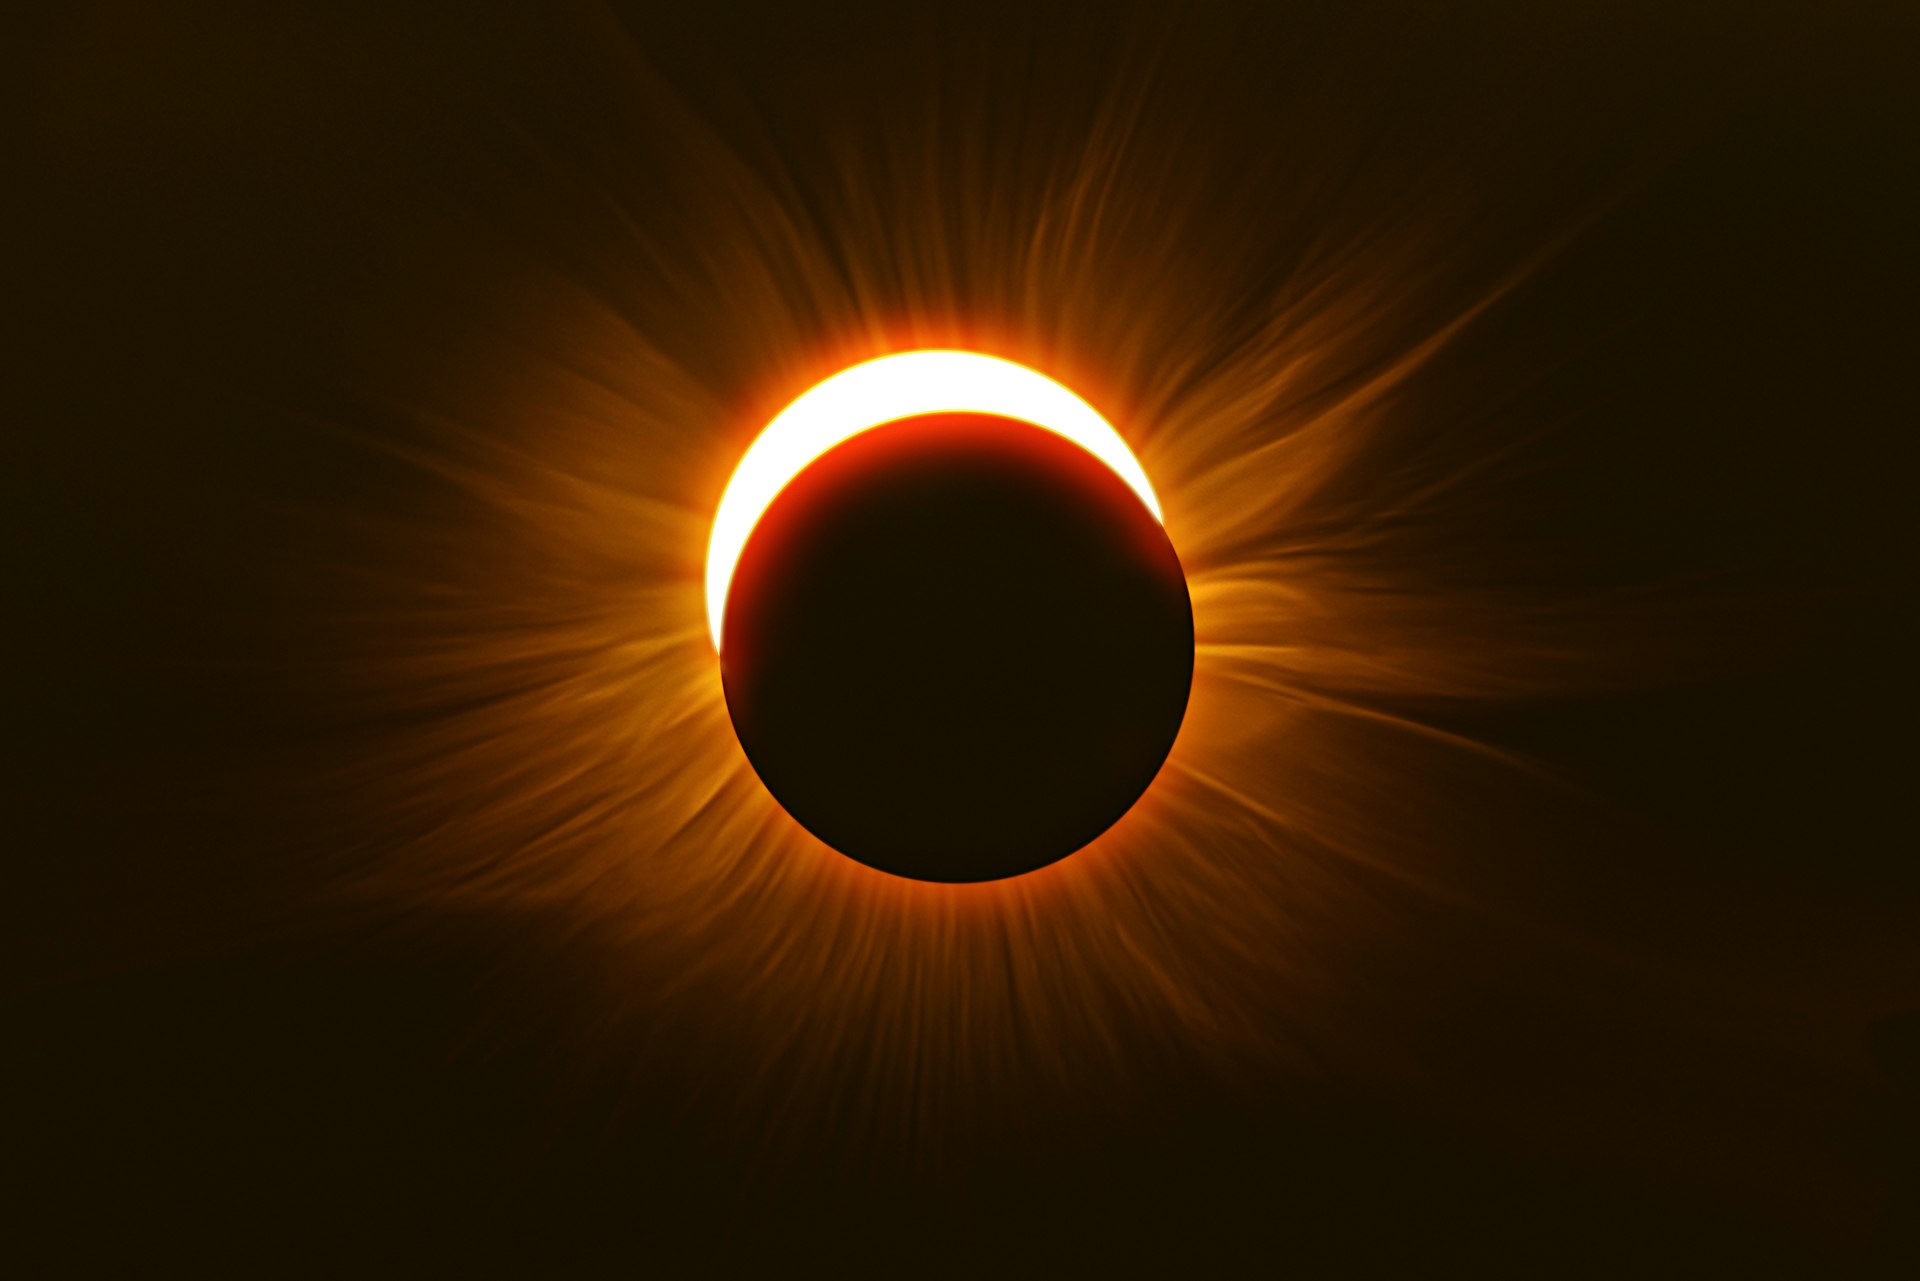 The moon moves across the sun during a solar eclipse; the sun's corona is visible. South America.